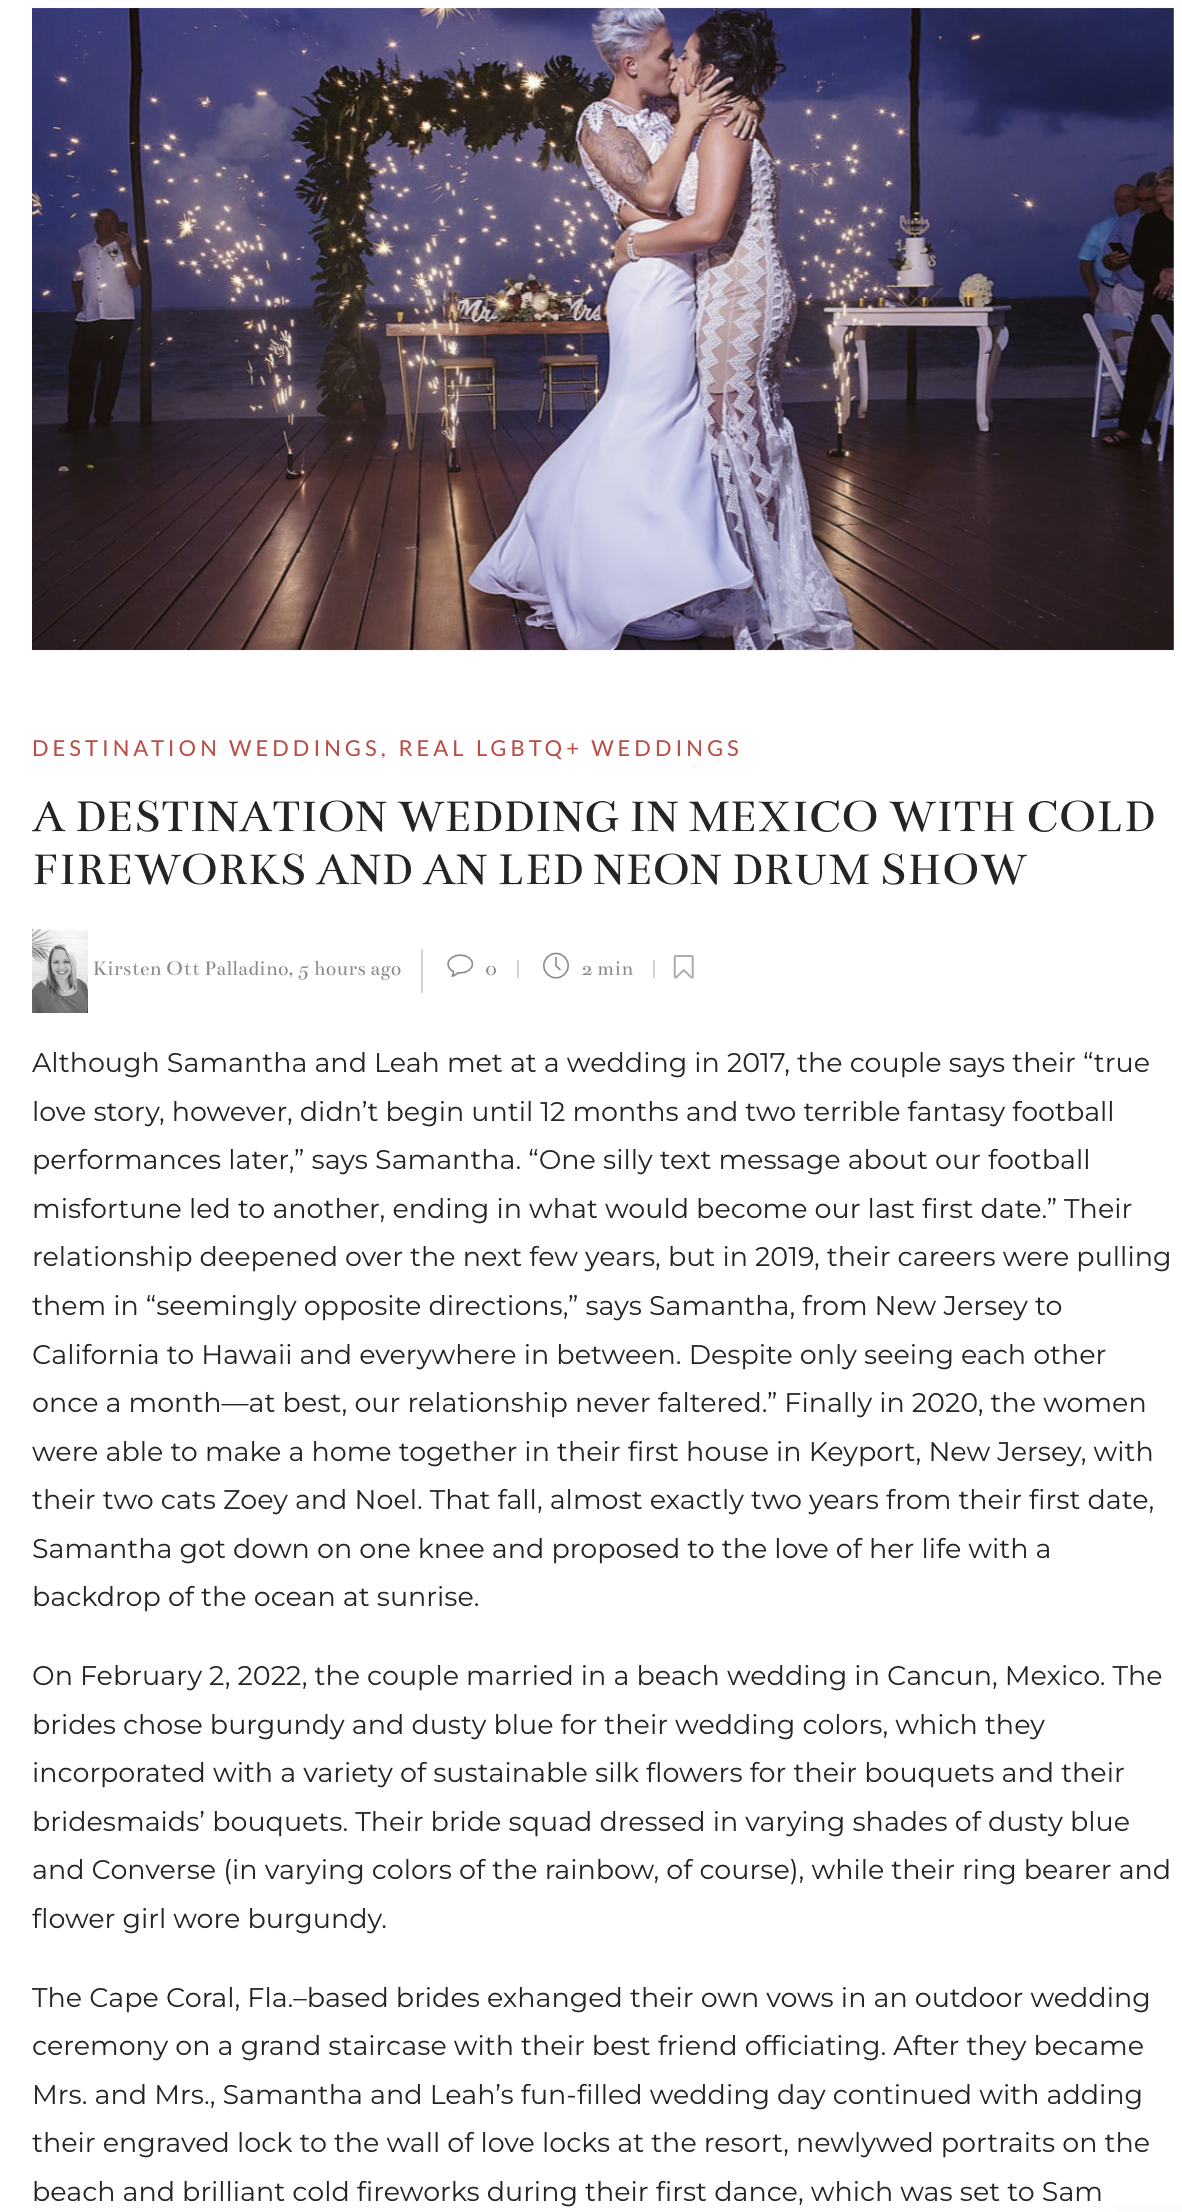 A DESTINATION WEDDING IN MEXICO WITH COLD FIREWORKS AND AN LED NEON DRUM SHOW